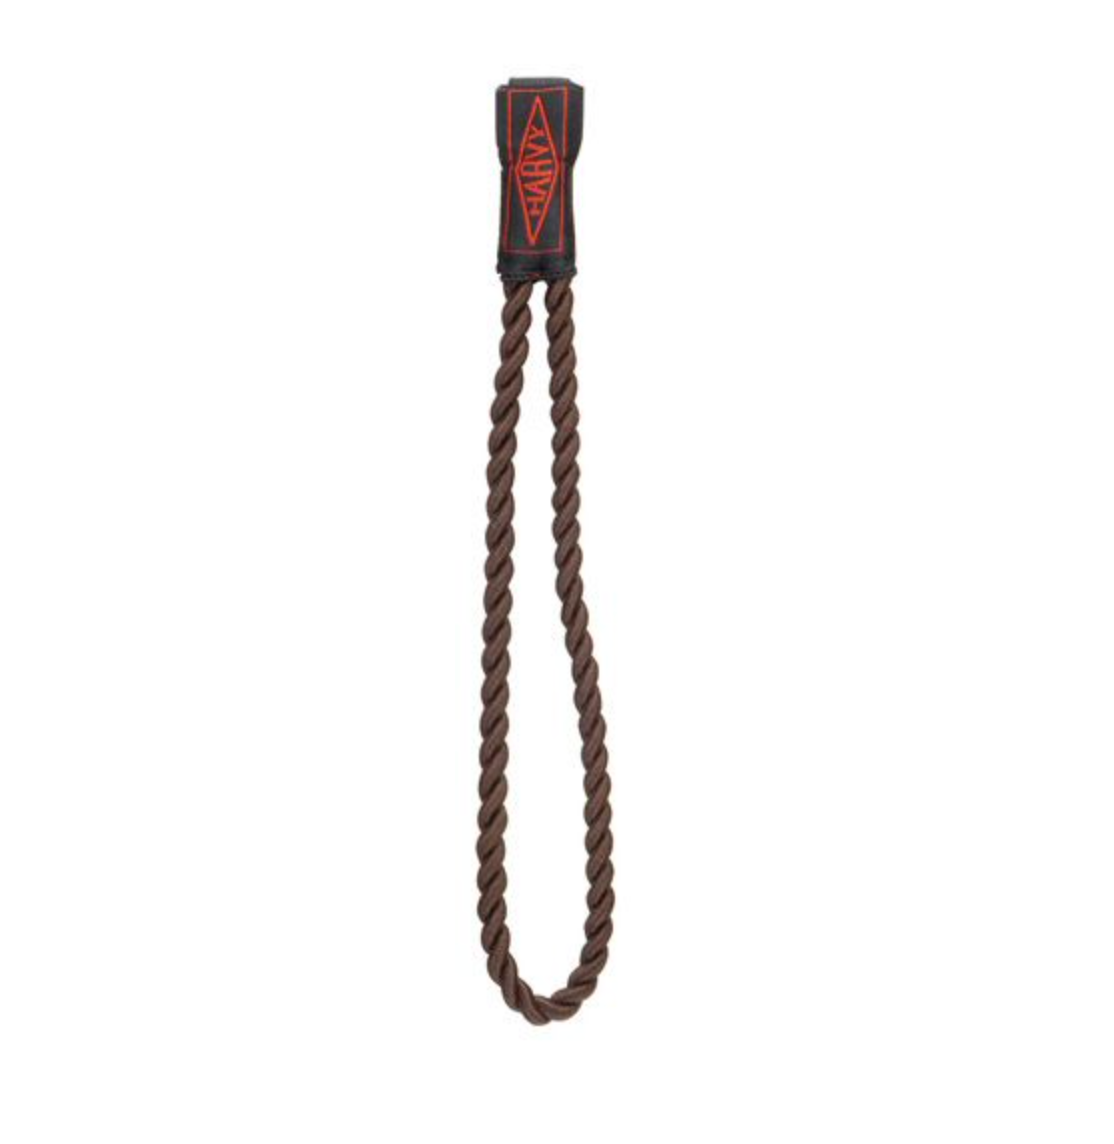 Cane Strap, Rope Style With Harvy Emblem Brown